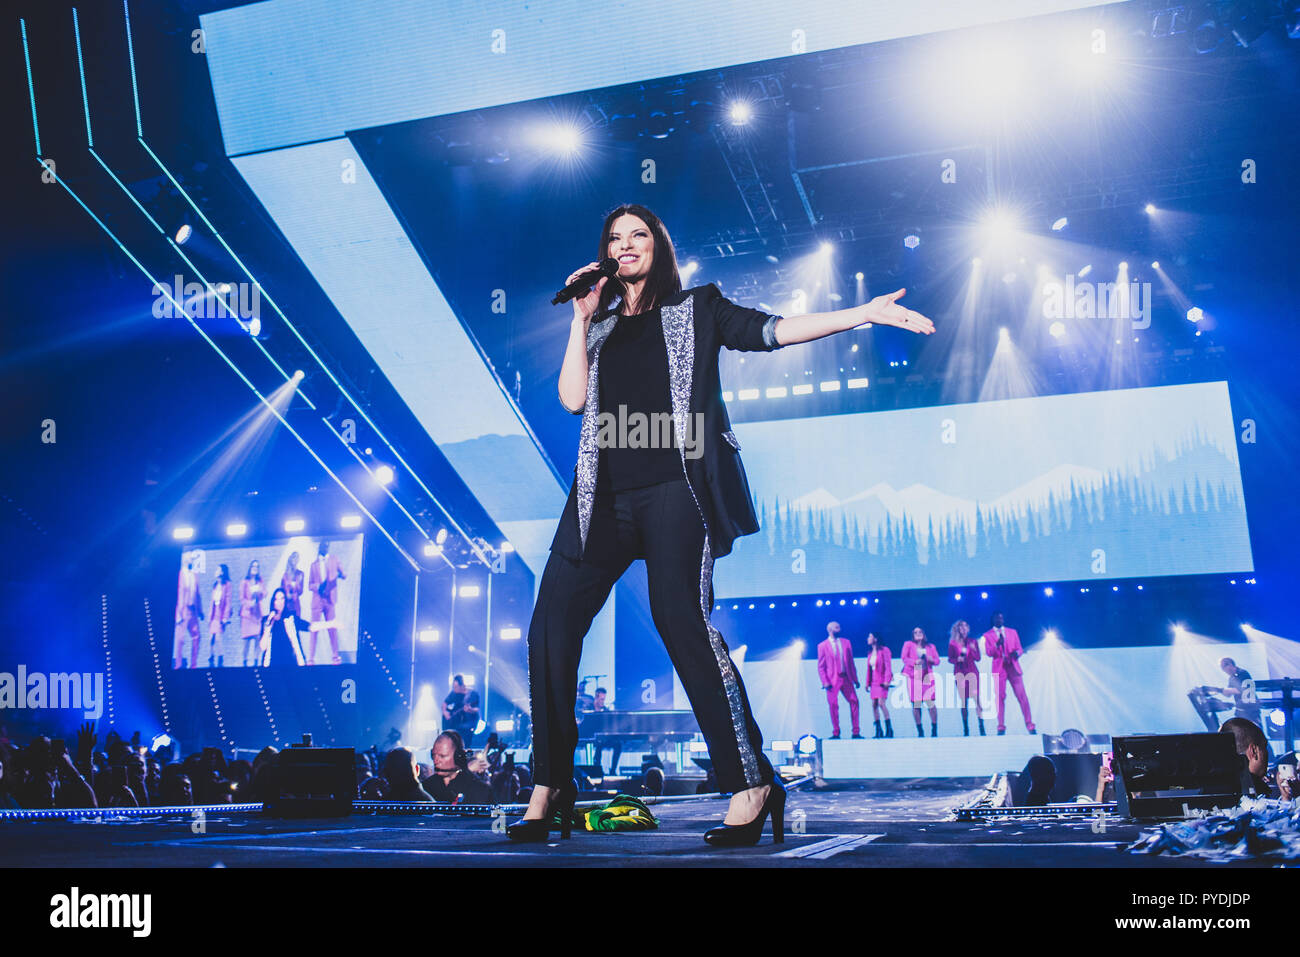 Torino, Italy. 27th Oct, 2018. Laura Pausini performing live on stage for the 'Fatti Sentire' world tour 2018 in Torino, in front of a sold out arena. Credit: Alessandro Bosio/Pacific Press/Alamy Live News Stock Photo